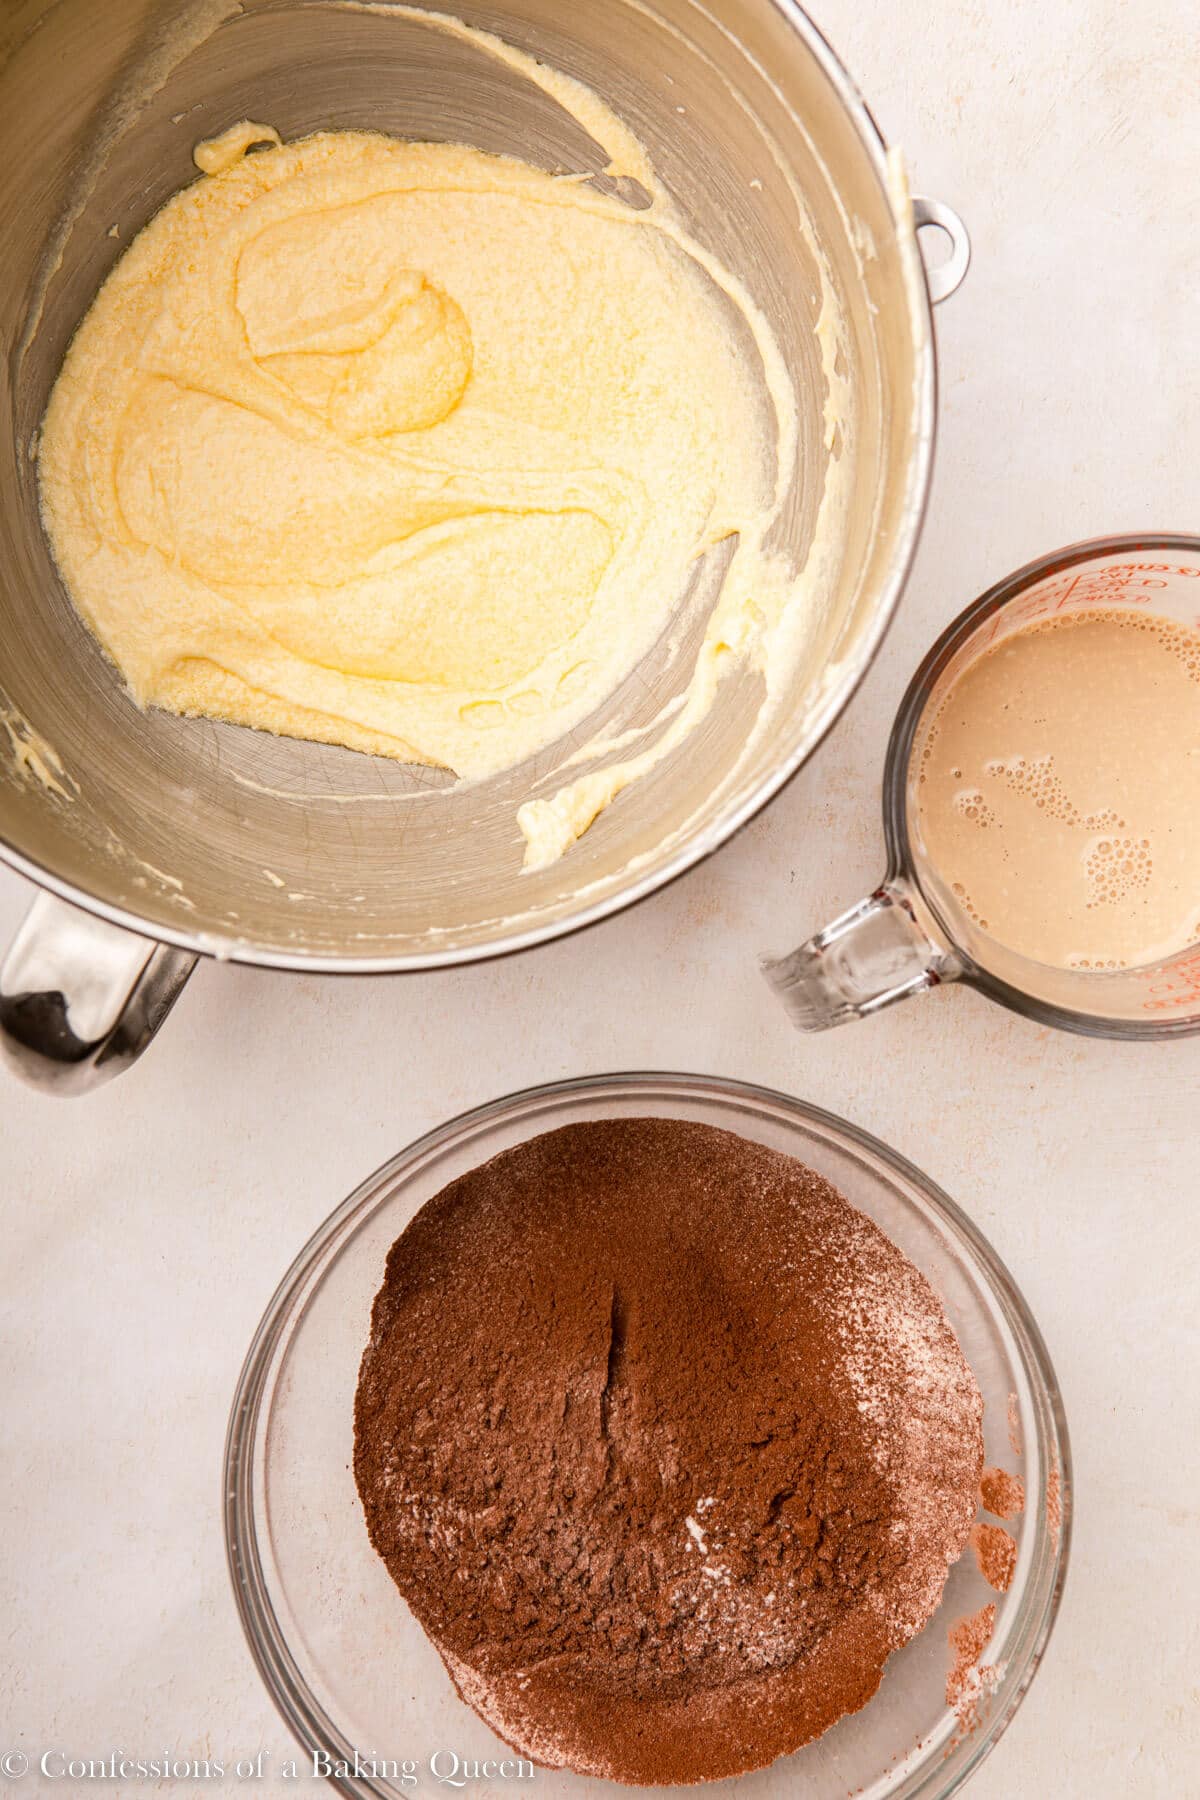 chocolate pound cake batter ingredients in three separate bowls on a light surface